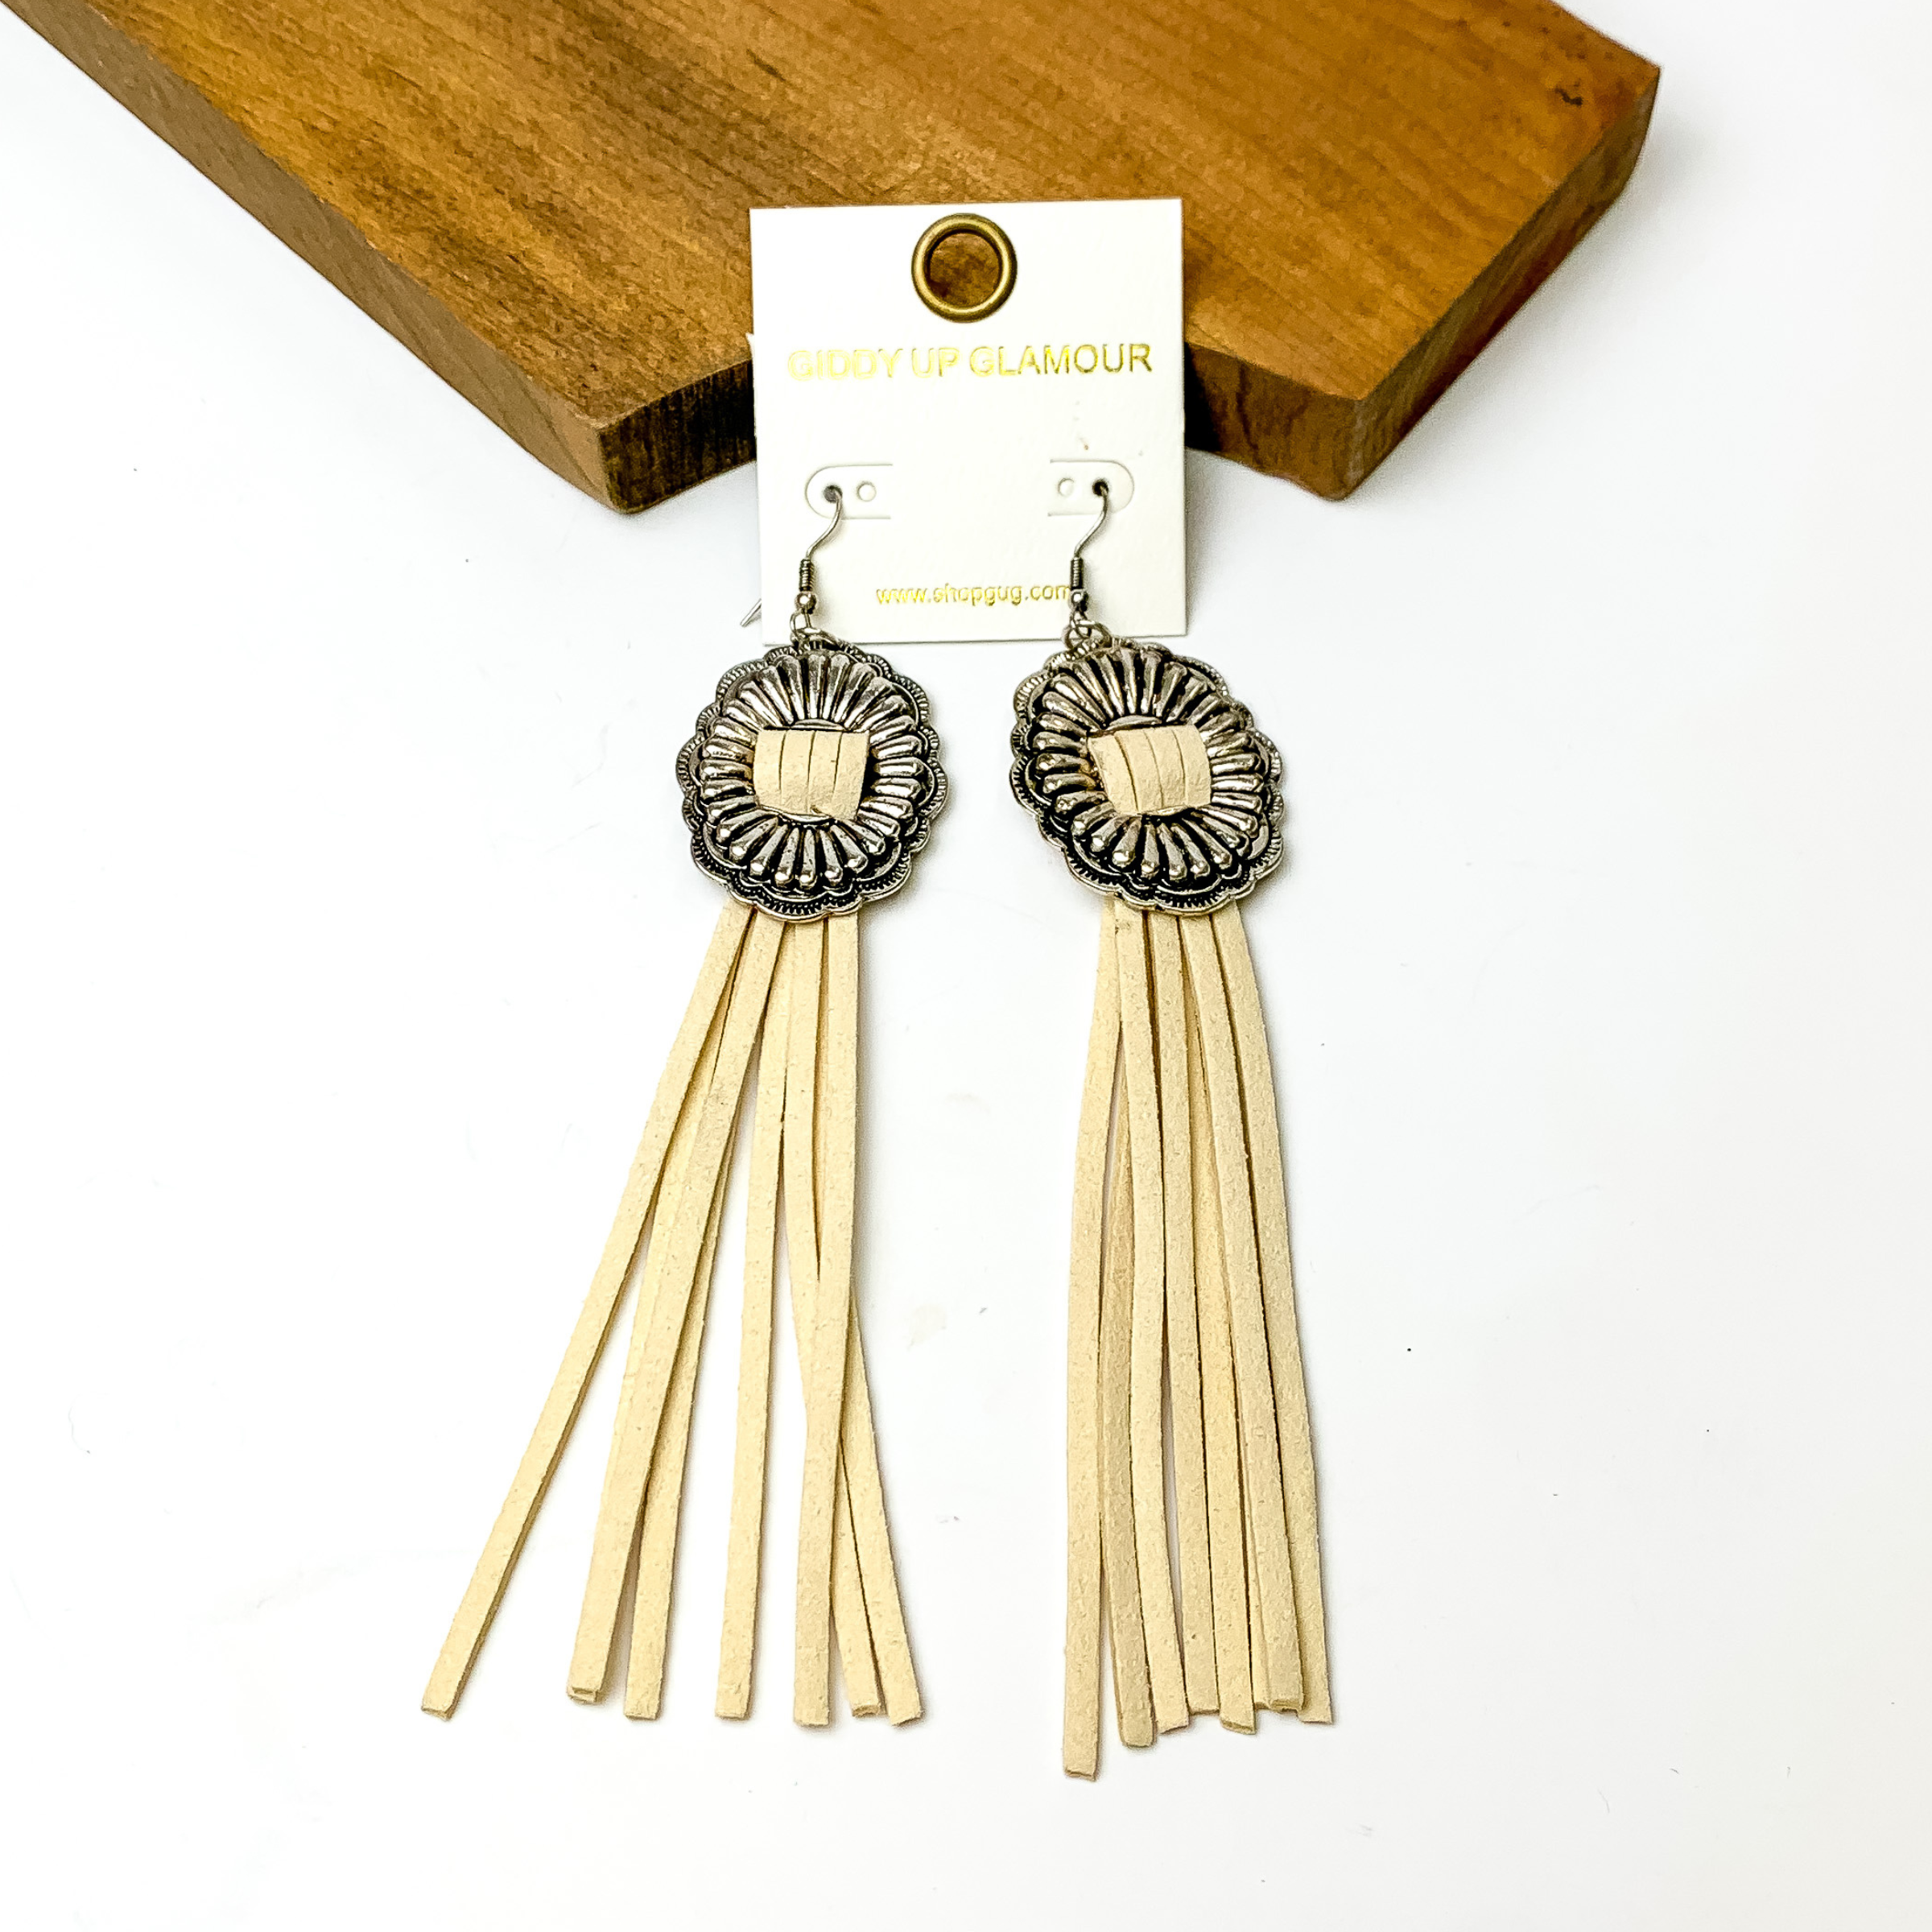 Silver concho dangle earrings with ivory tassels. These earrings are pictured on a white background with a brown block at the top of the picture.